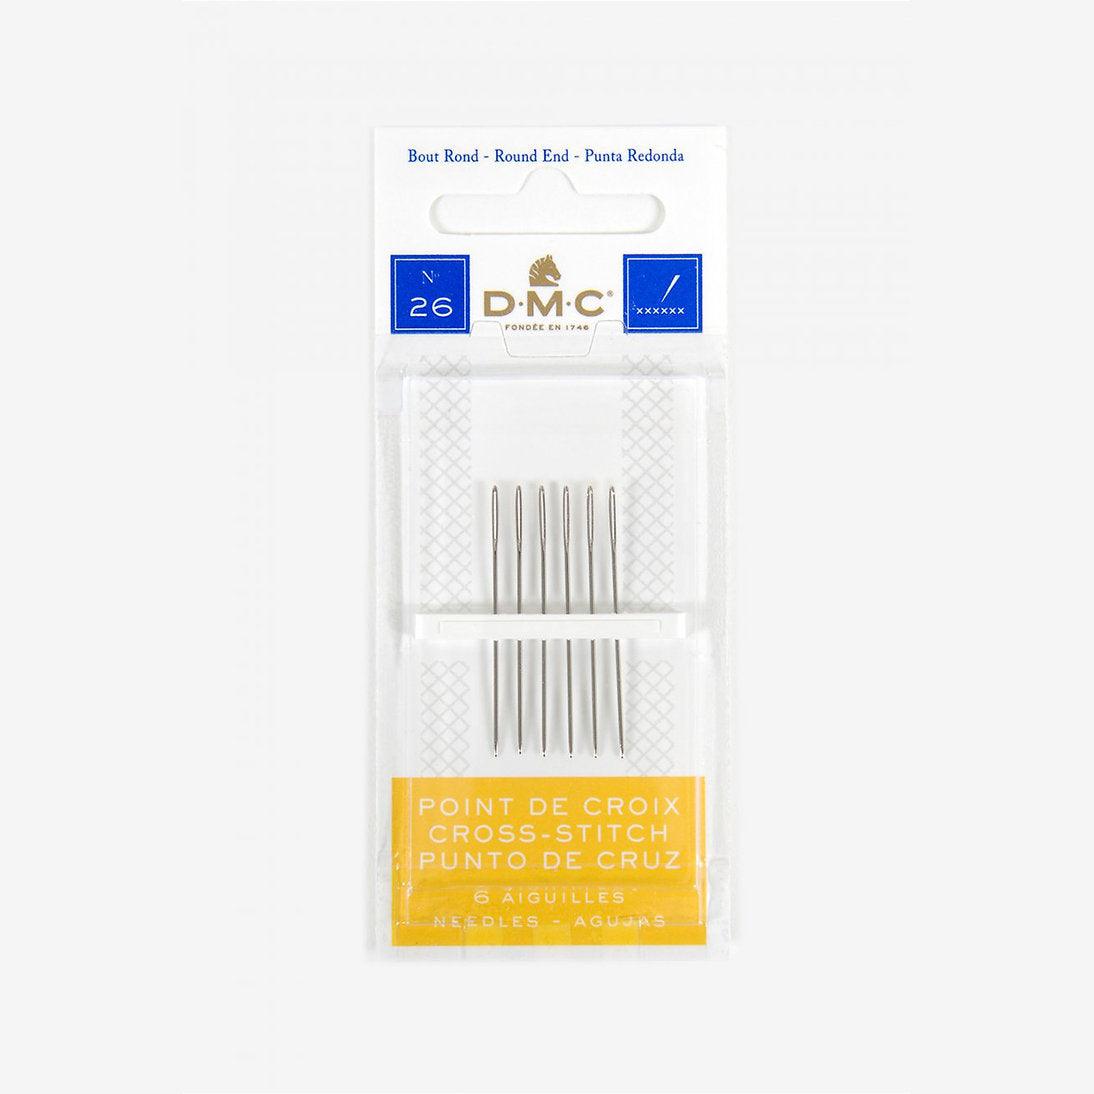 Pack of 6 DMC Cross Stitch Embroidery Needles No. 26 - Rounded Tip